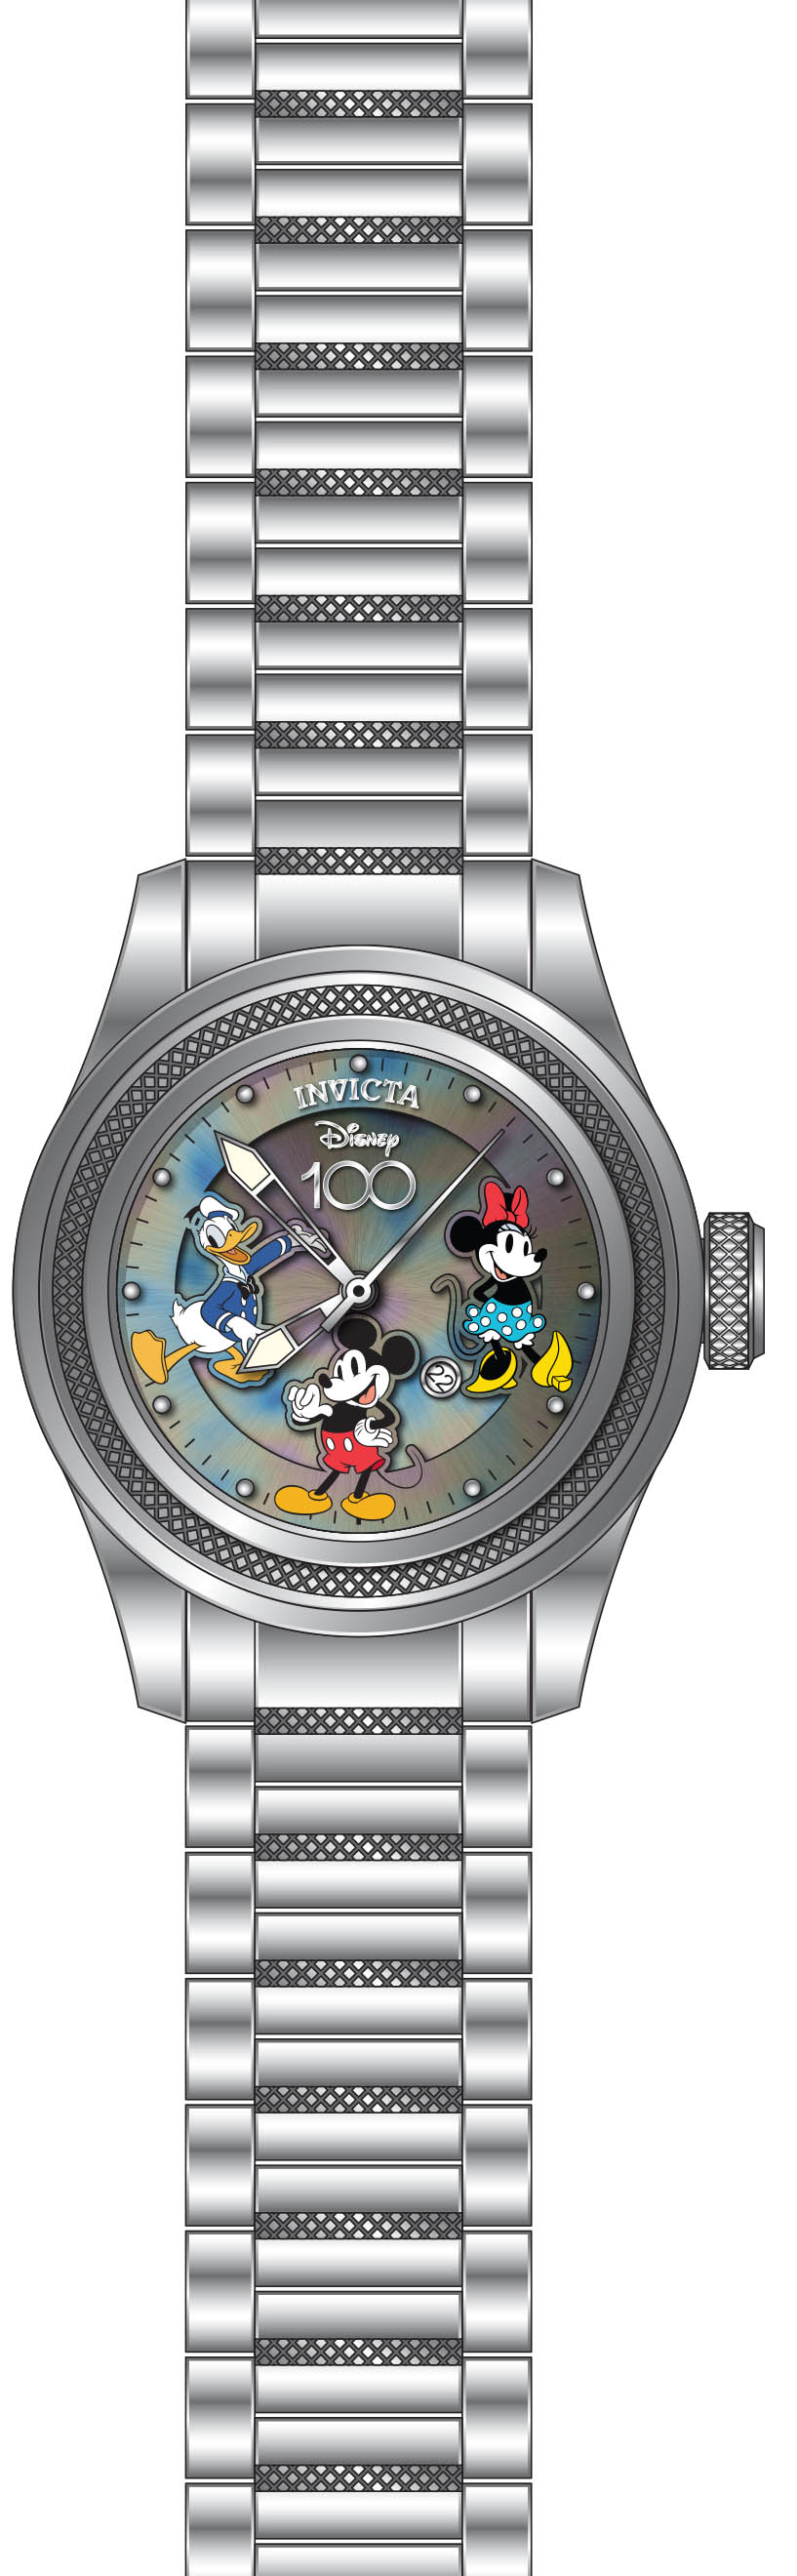 Band For Invicta Disney Limited Edition  Lady 44740